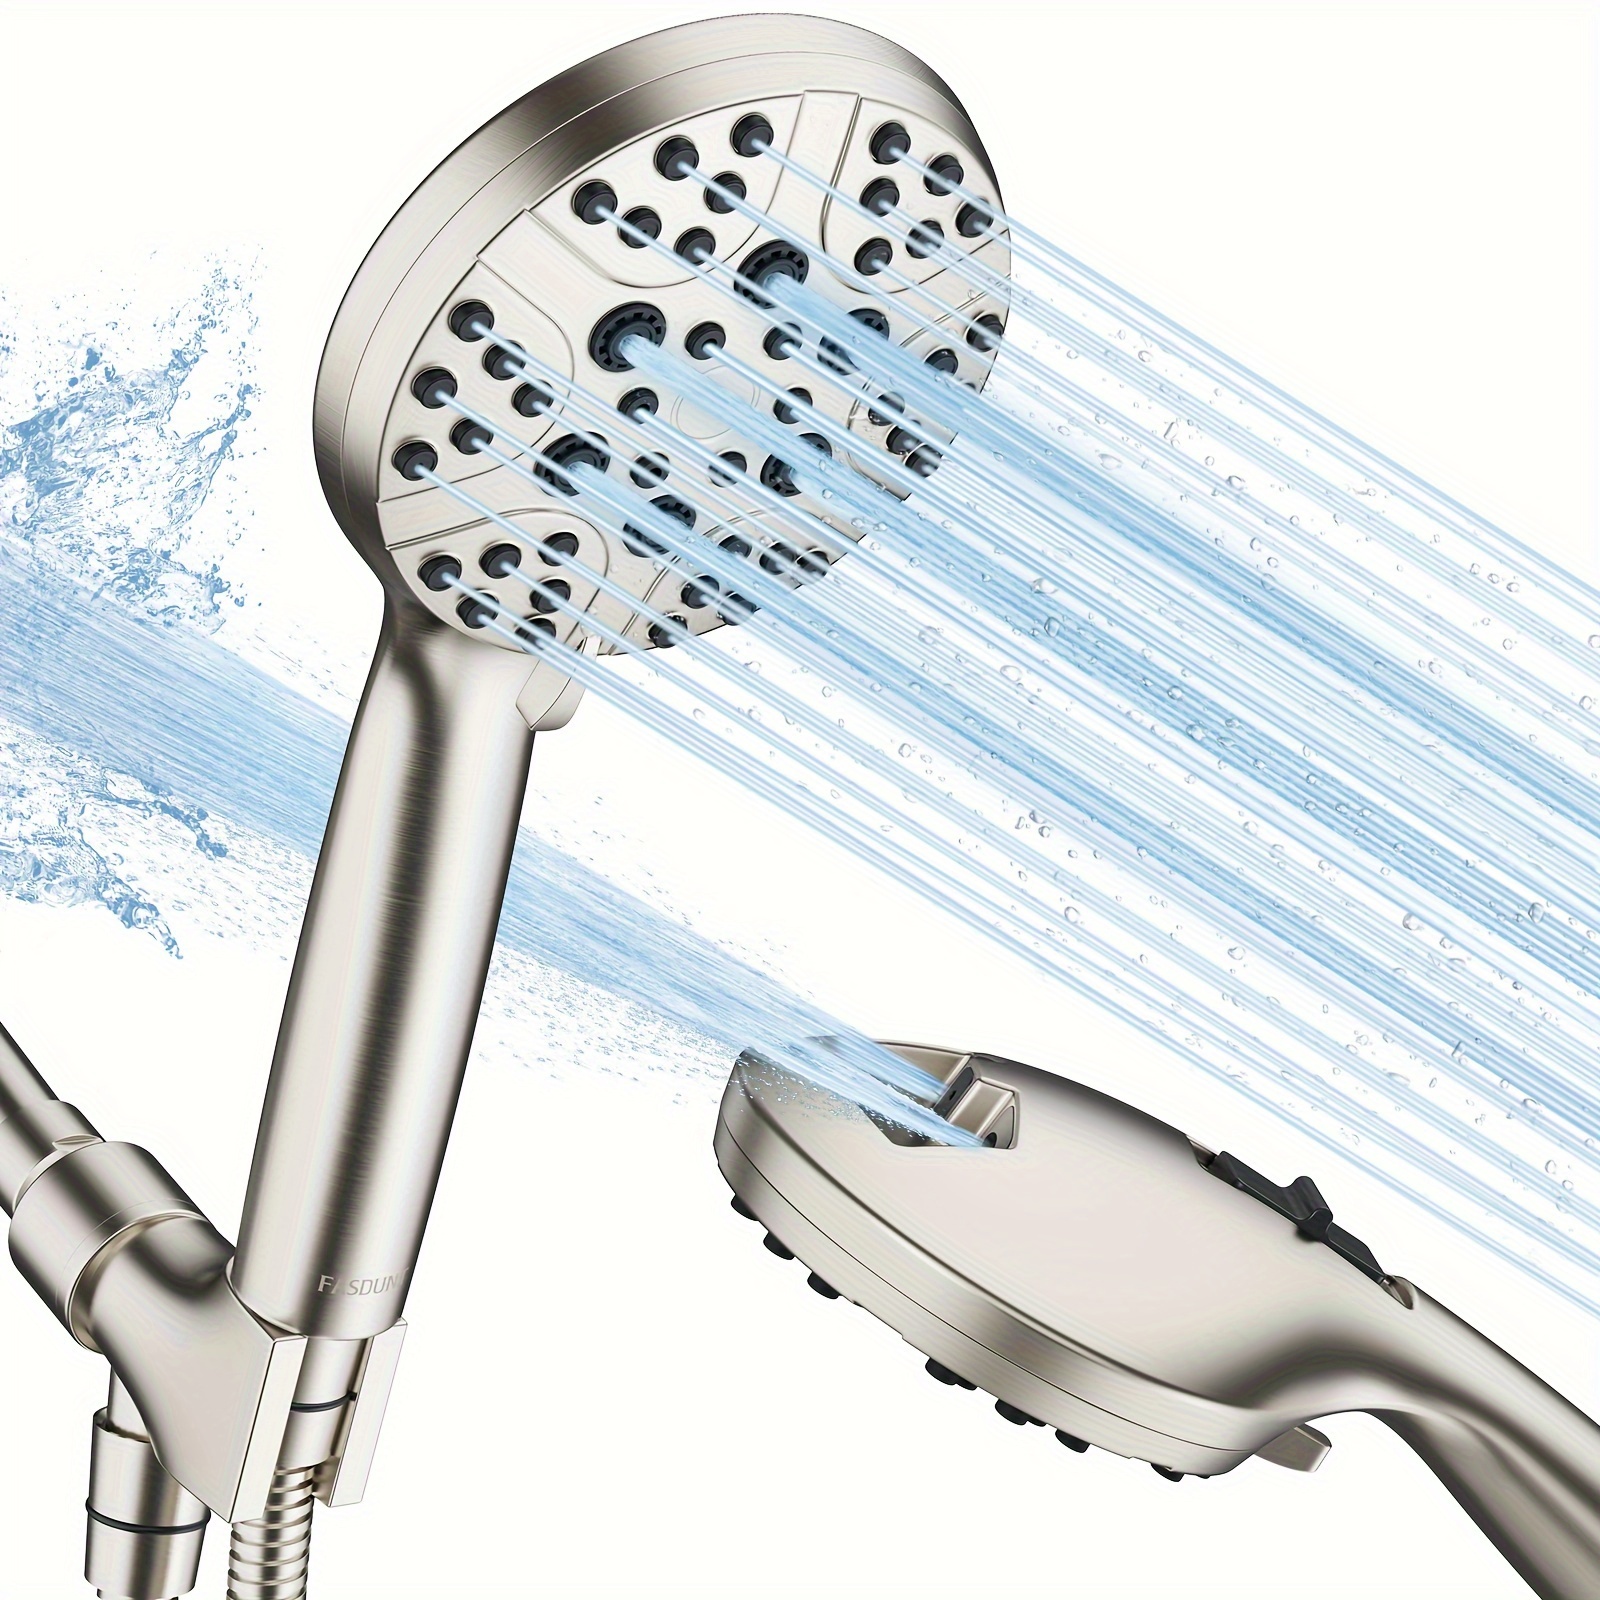 

High Pressure Shower Head With Handheld, 8-mode Shower Heads With 80" Extra Long Stainless Steel Hose & Adjustable Bracket, Built-in Power Wash To Clean Tub, Tile & Pets - Brushed Nickel